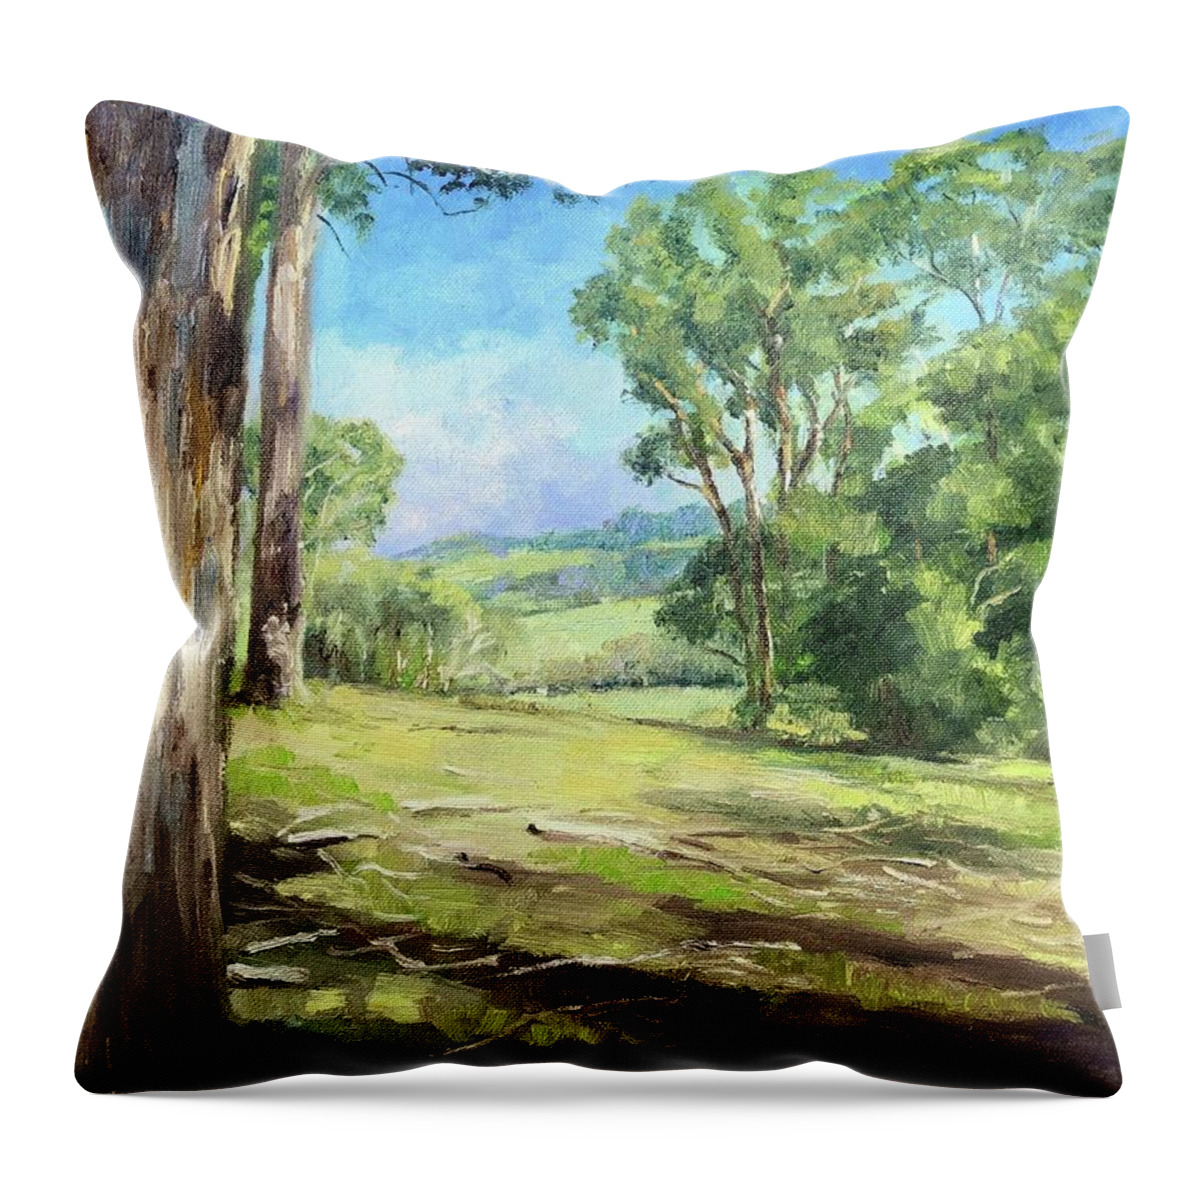 Gippsland Throw Pillow featuring the painting The Gurdies Gippsland West by Dai Wynn